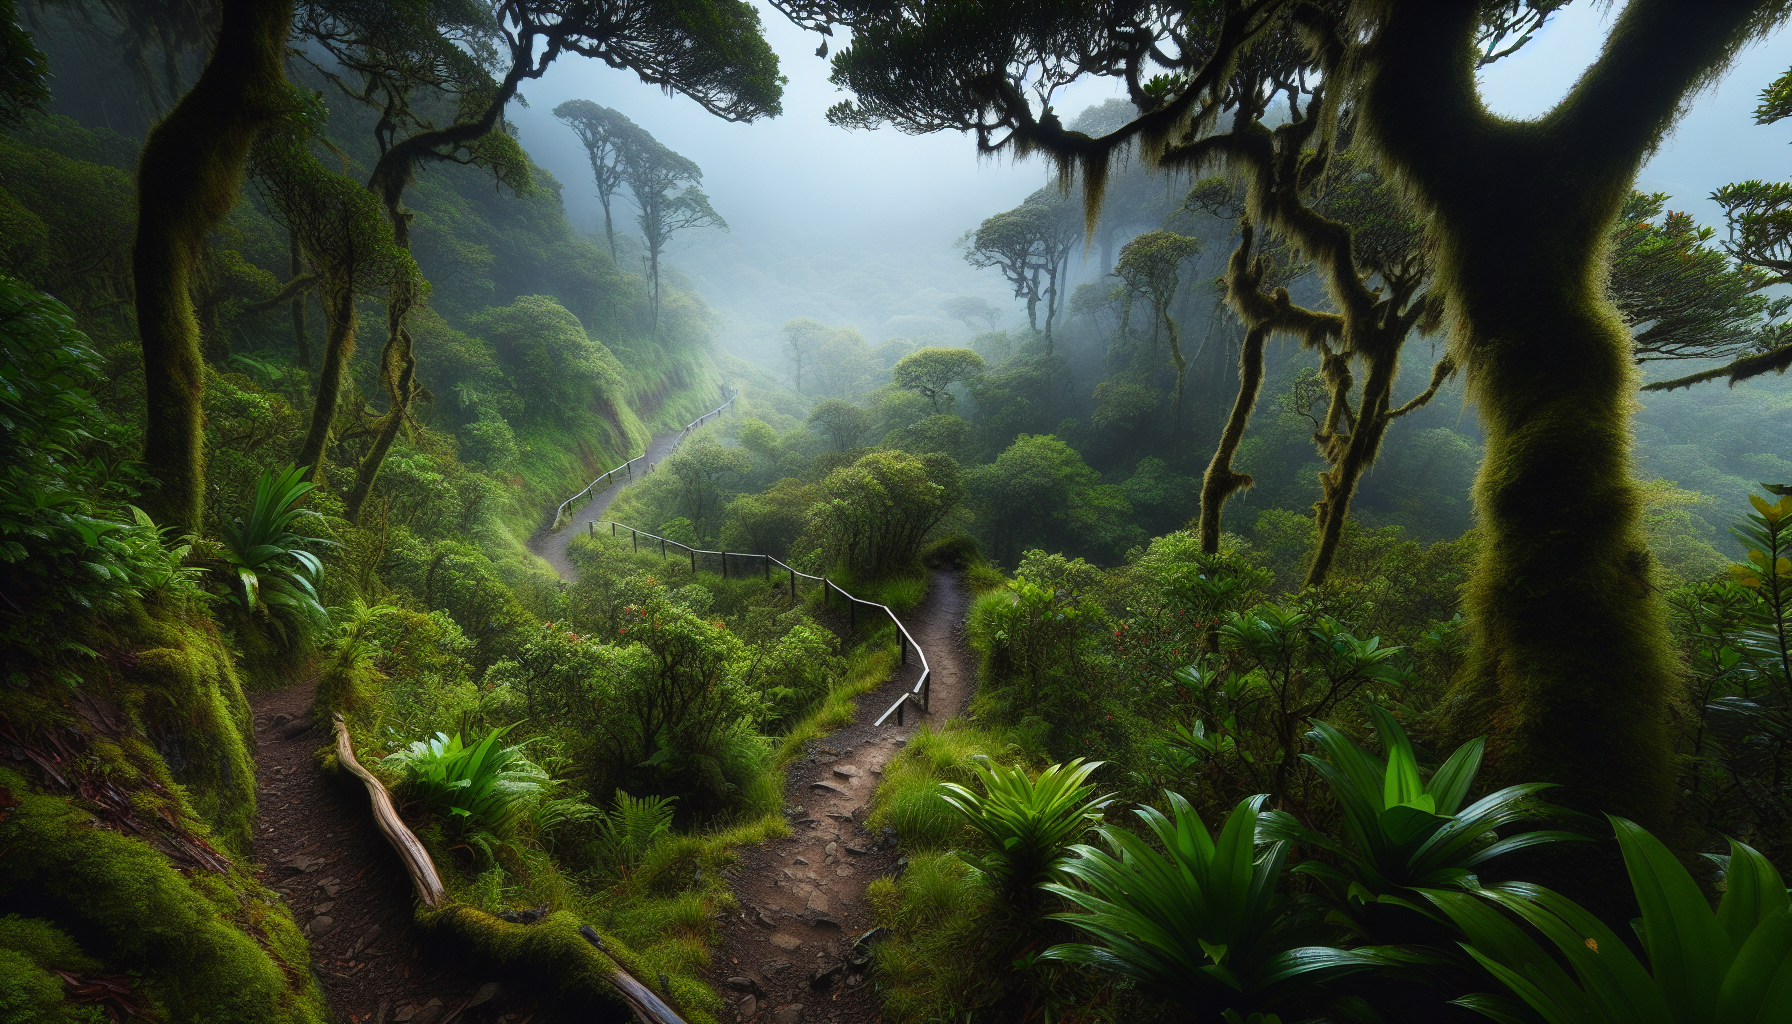 Hiking trail through the cloud forest